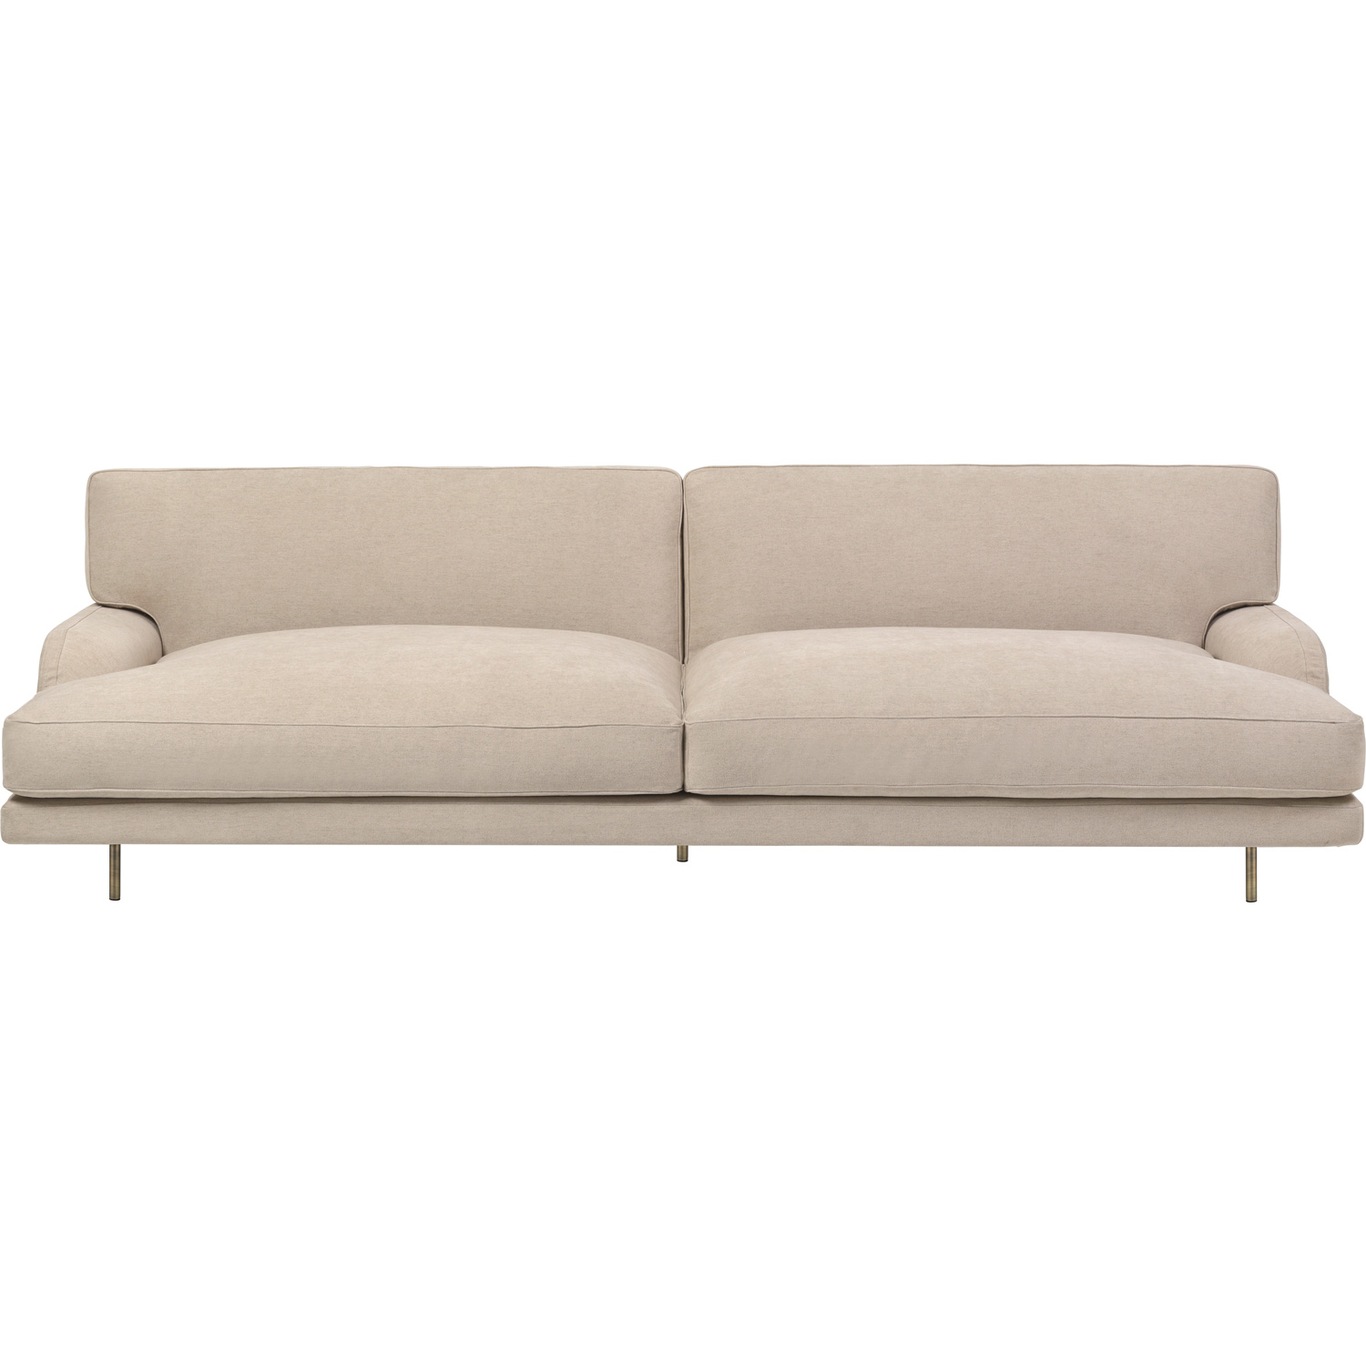 Flaneur Sofa LC 2-seters, Ben Messing / Hot Madison 073 Beige